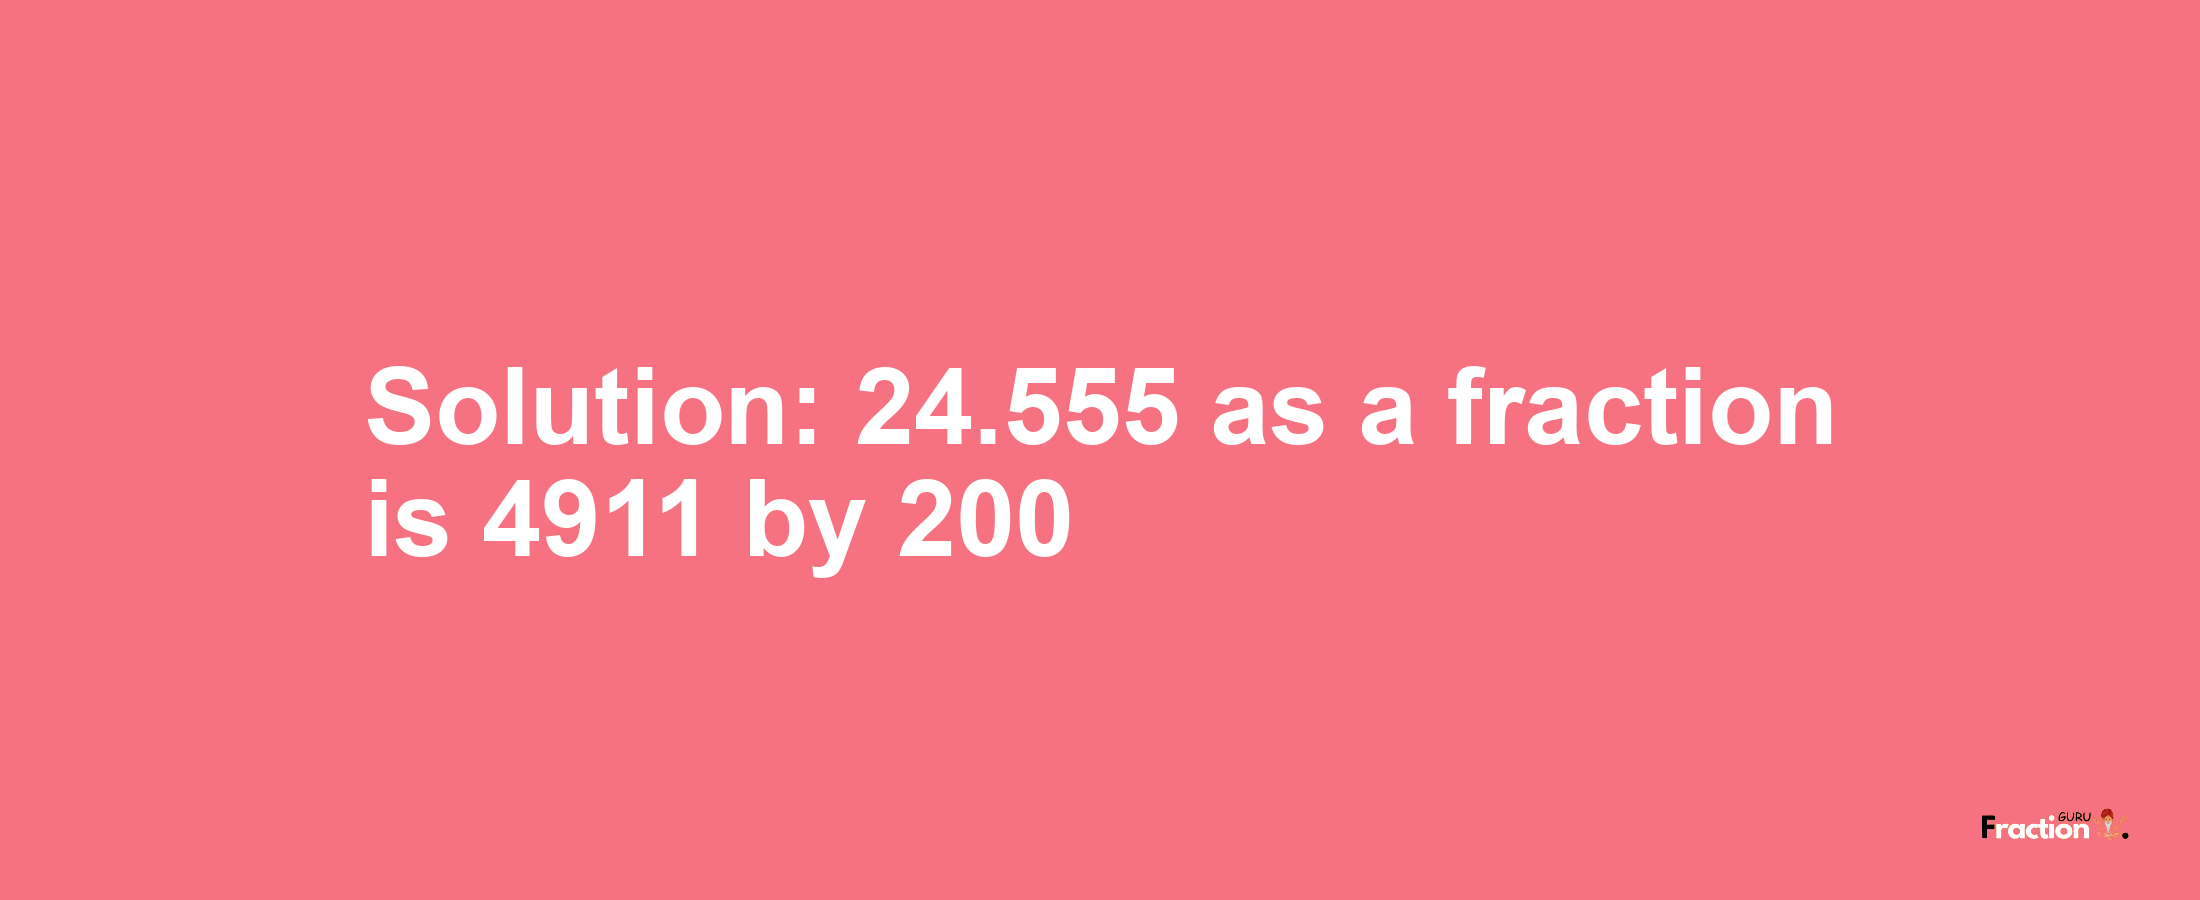 Solution:24.555 as a fraction is 4911/200